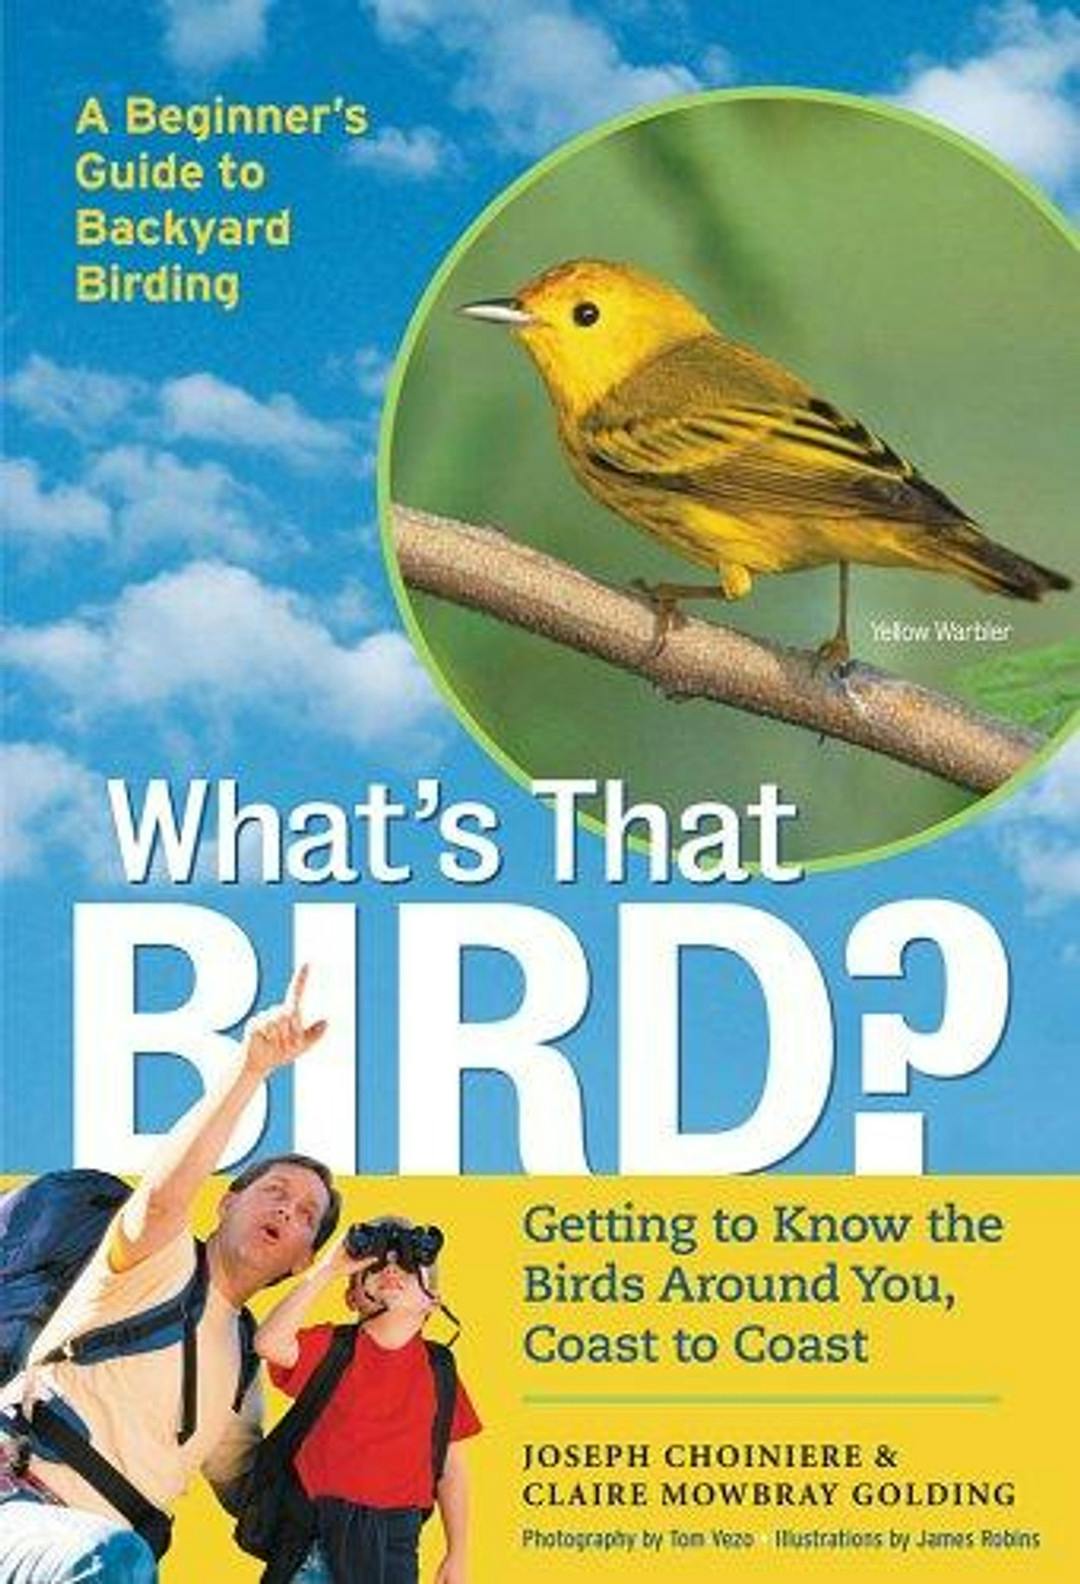 What's That Bird? Getting to Know the Birds Around You, Coast to Coast